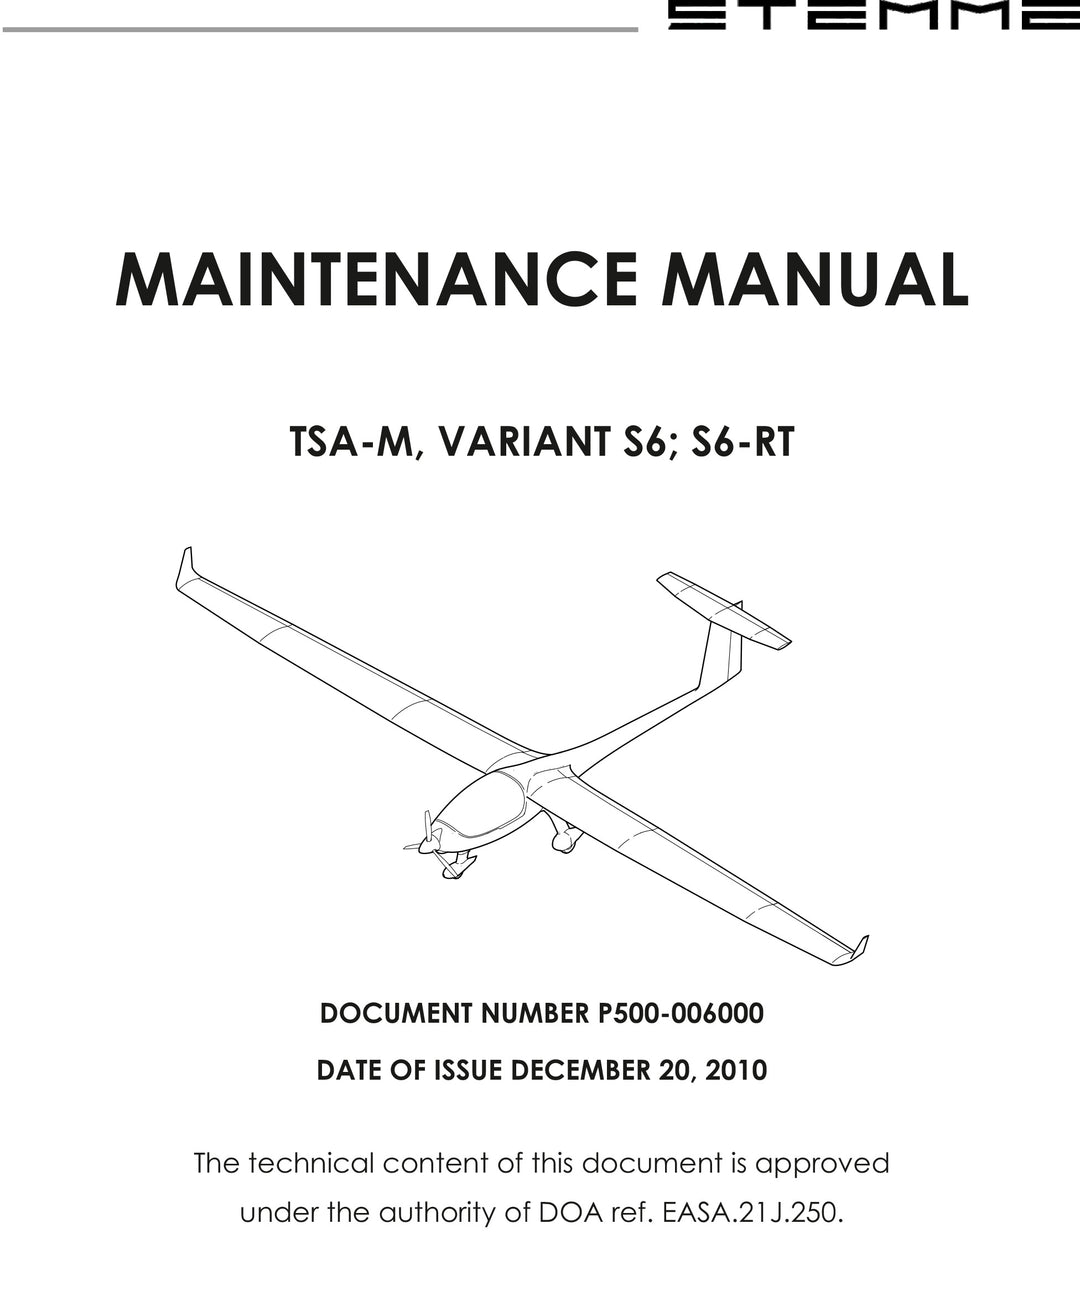 Complete S6 Maintenance Manual